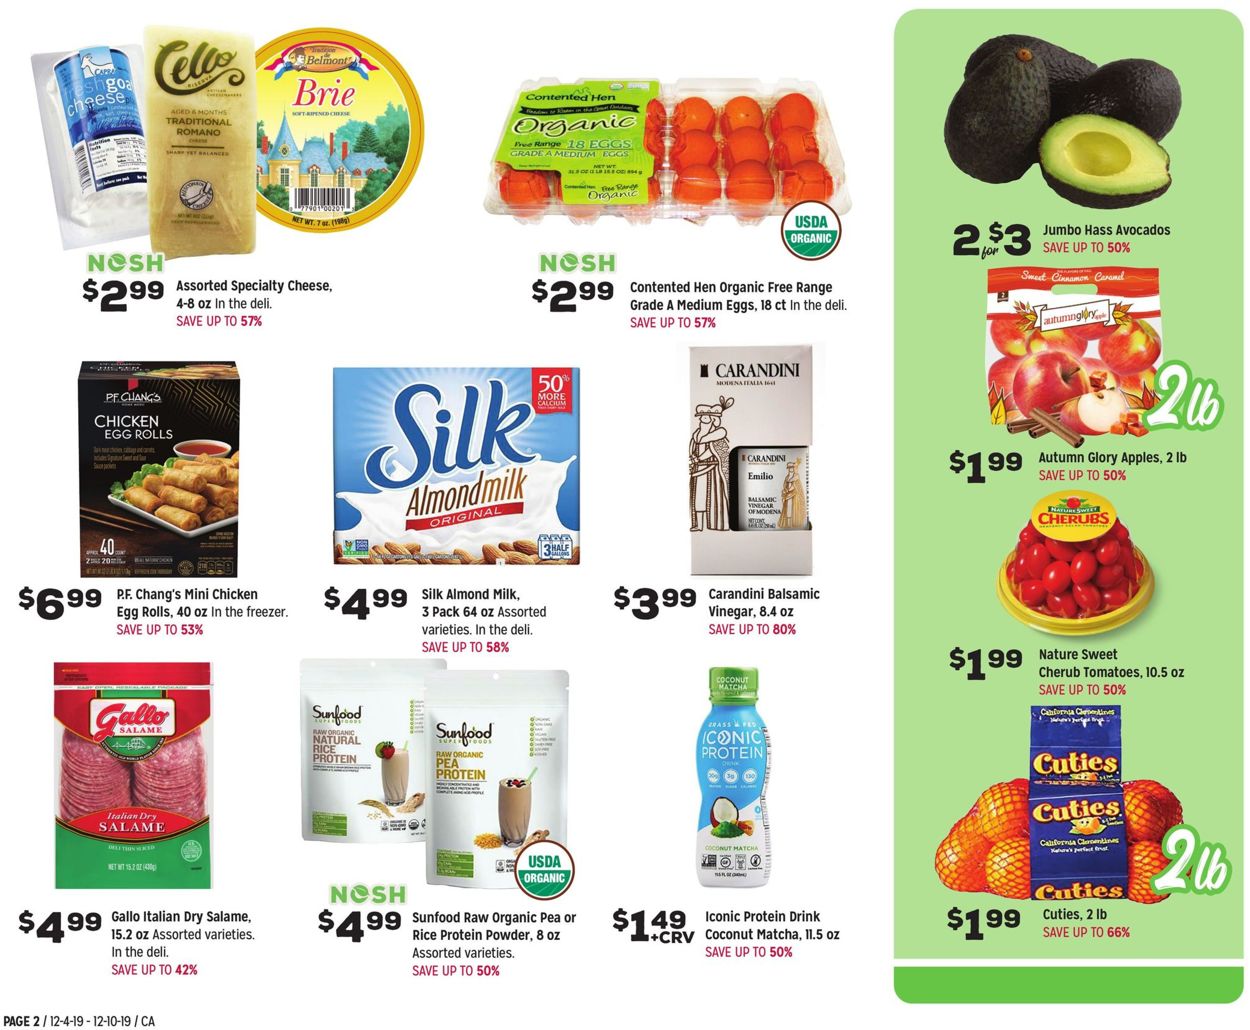 Grocery Outlet Weekly Ad Circular - valid 12/04-12/10/2019 (Page 2)